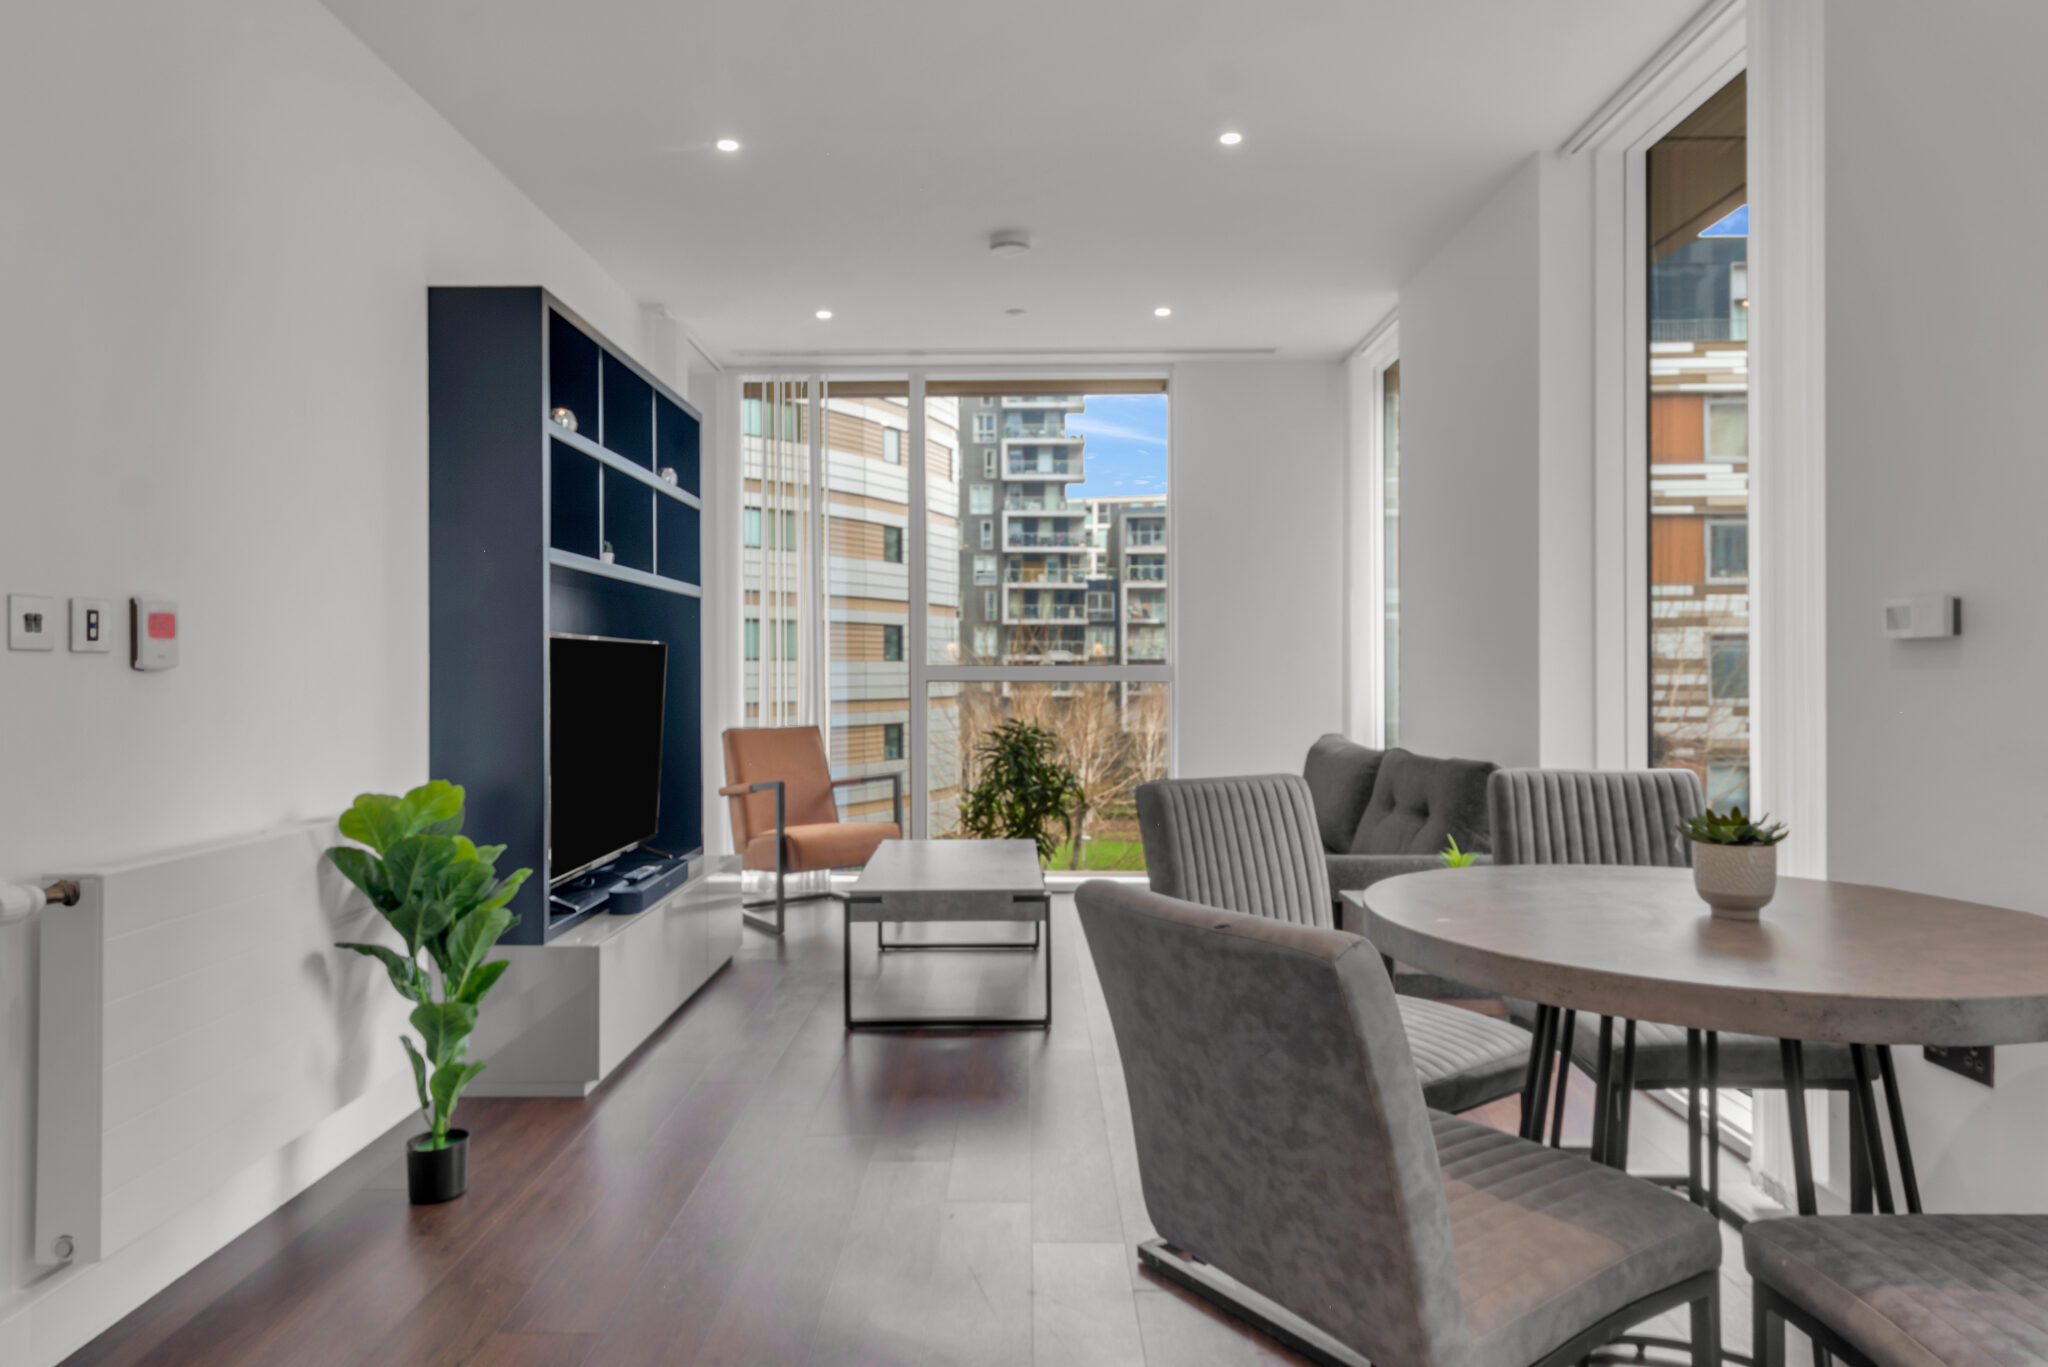 Discover The Best Serviced Apartments in Canary Wharf for short lets and corporate relocations. Experience stylish interiors & 5 Star Service - Urban Stay